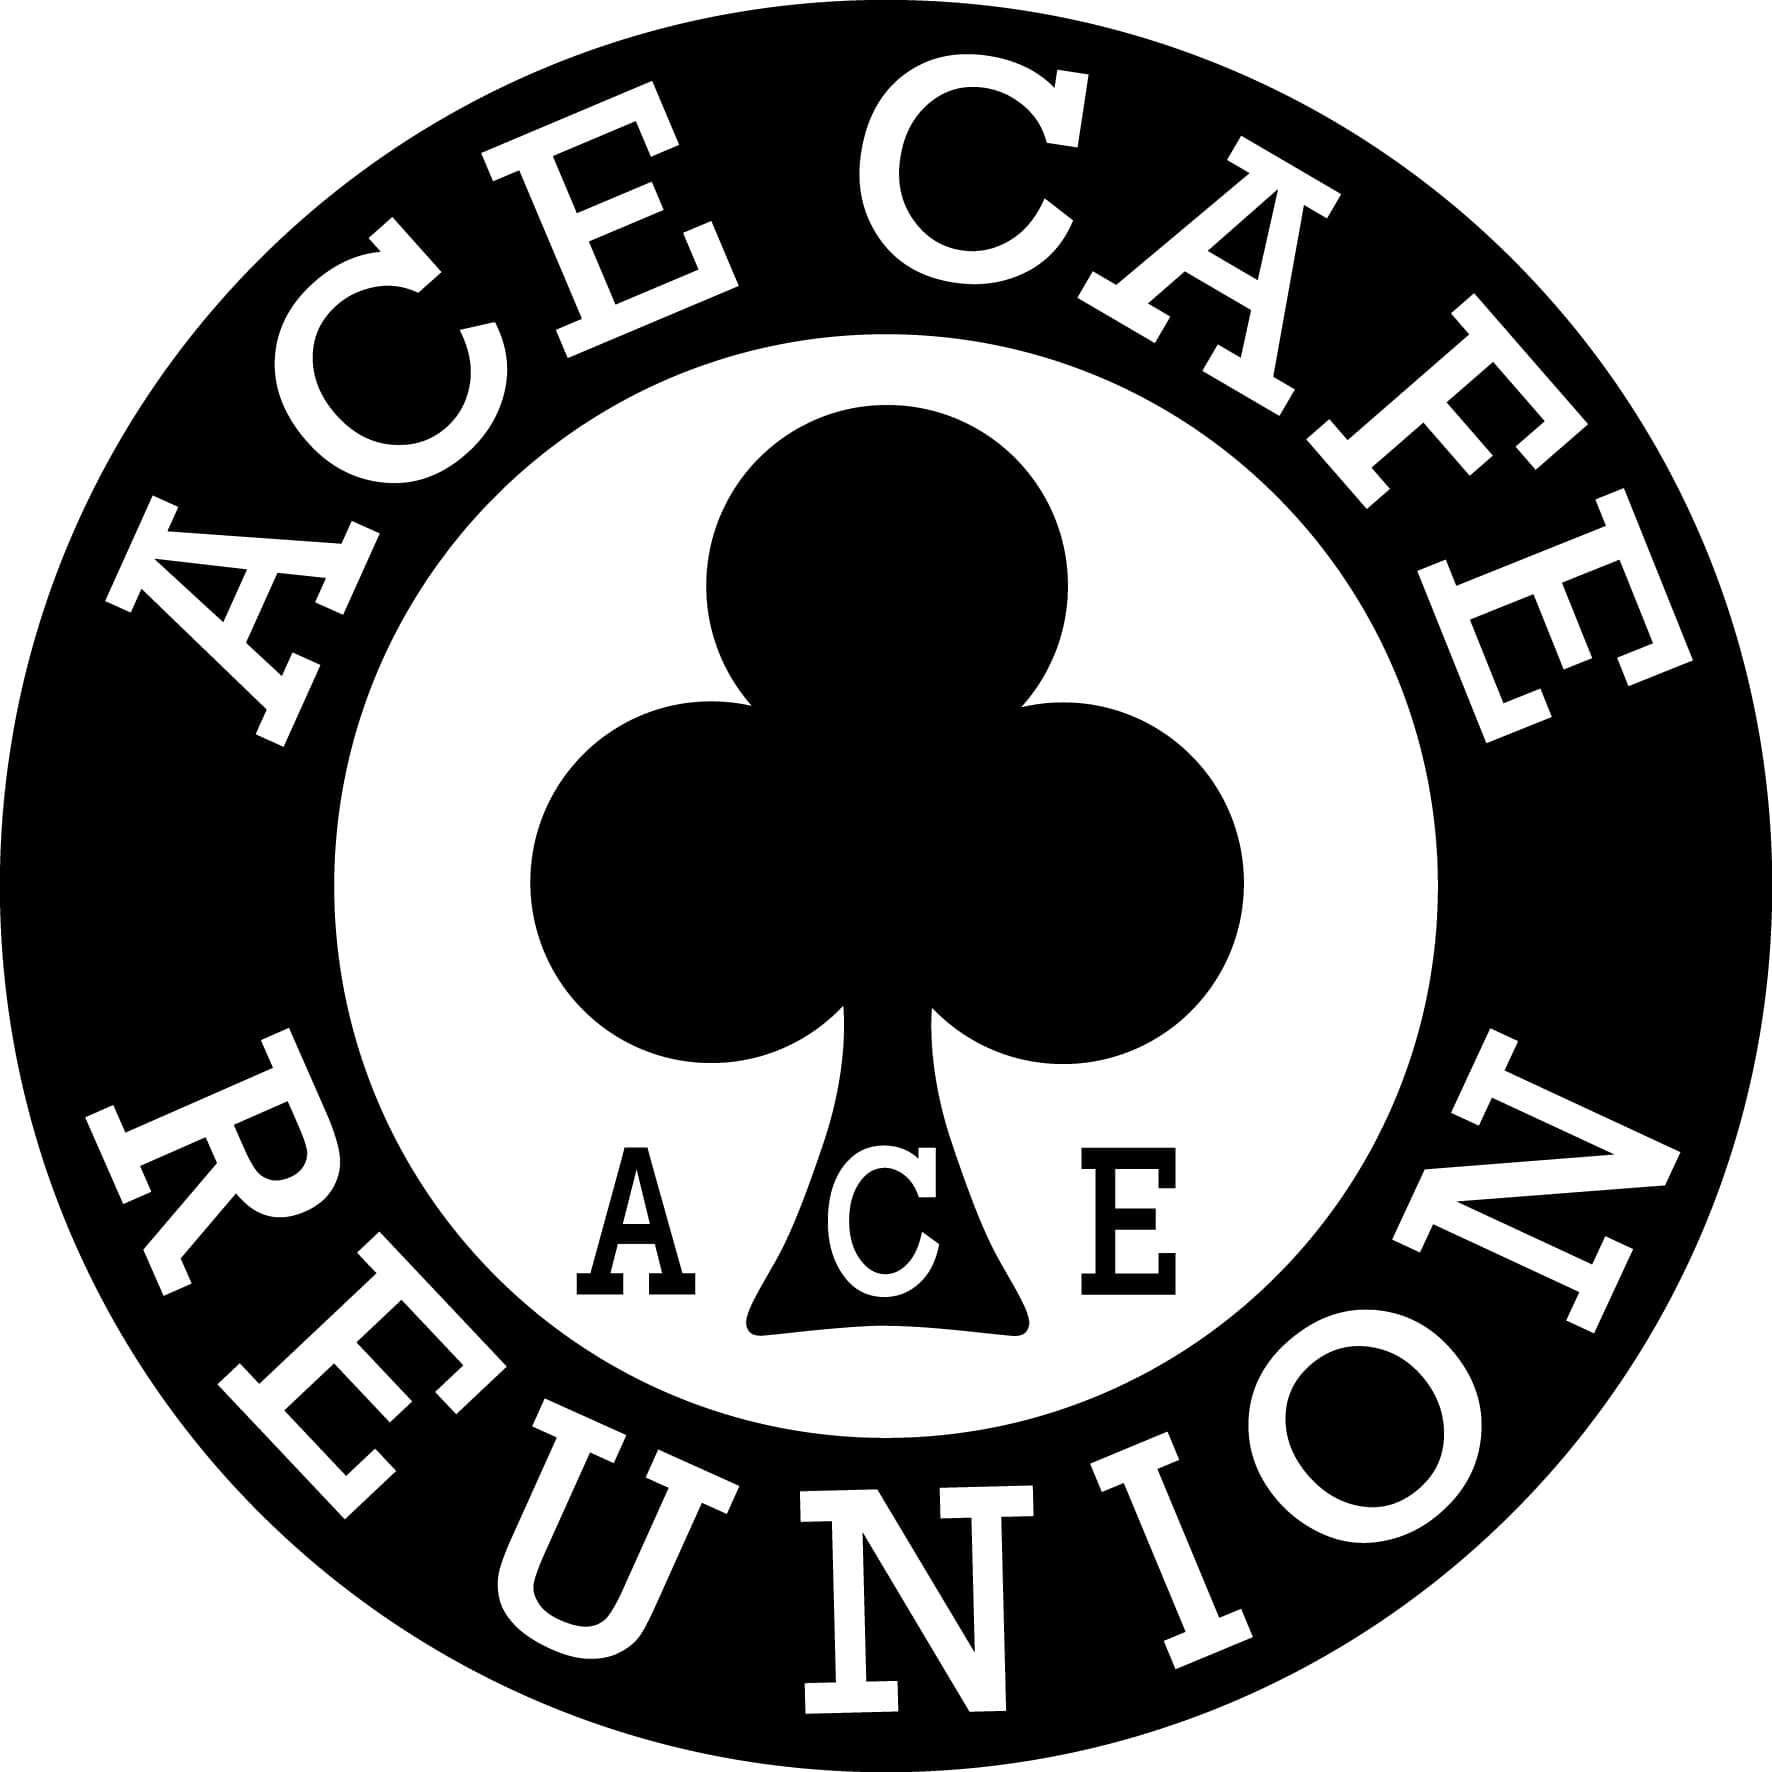 The 24Th Annual Ace Cafe Reunion Friday 8Th And Saturday 9Th September 2017 At The Cafe. Sunday 10Th September Brighton Burn Up Three Days, Three Rides, Hdpng.com  - Ace Cafe London, Transparent background PNG HD thumbnail